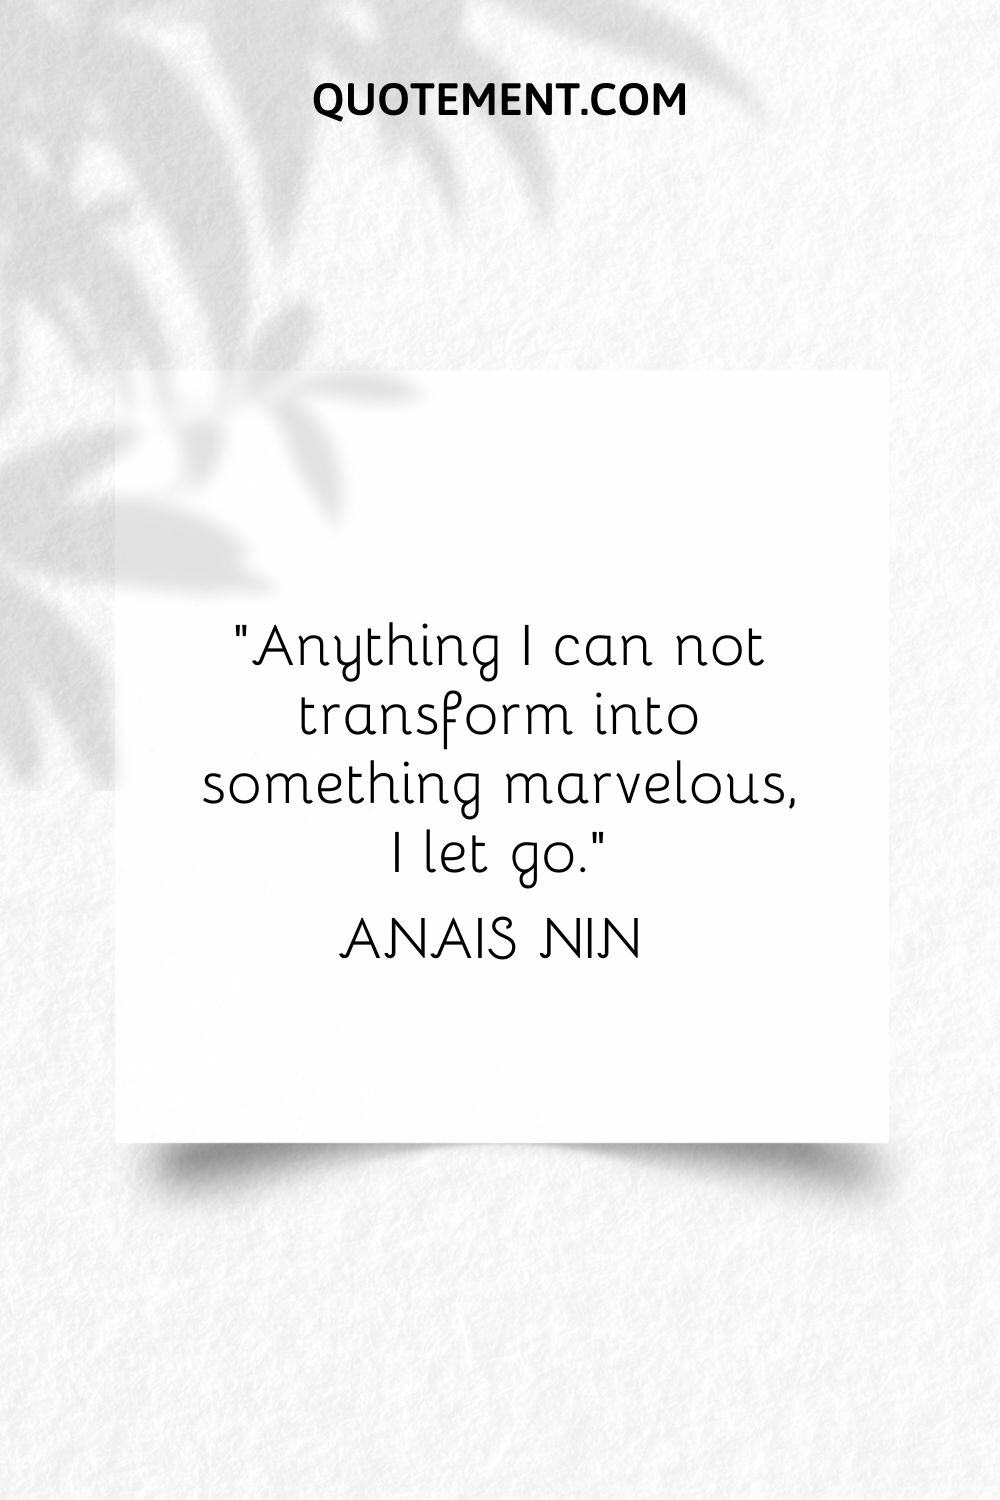 “Anything I can not transform into something marvelous, I let go.” — Anais Nin